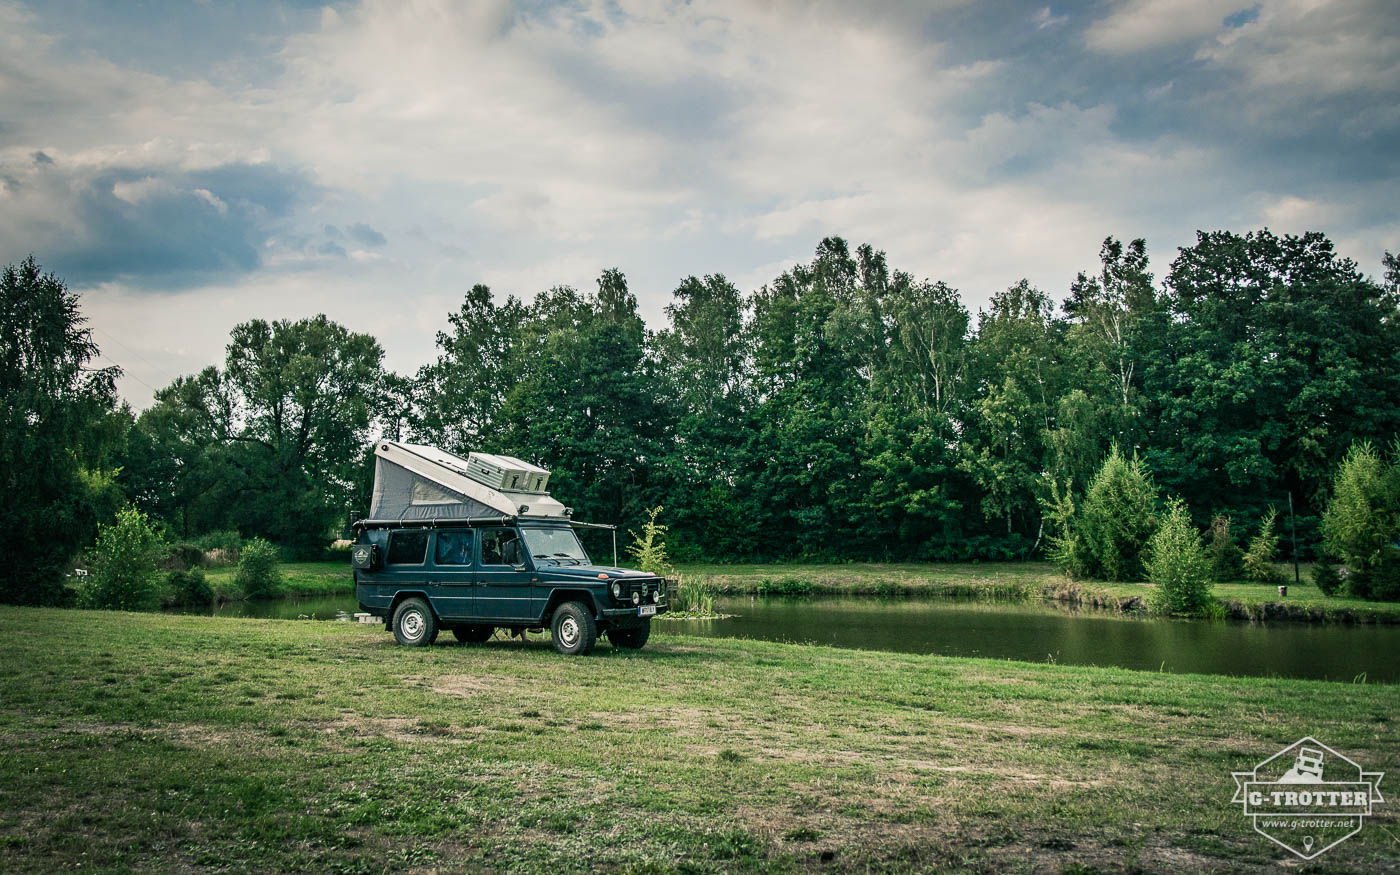 In Imielin, a small village close to the town Oswiecim, we found a nice campsite (